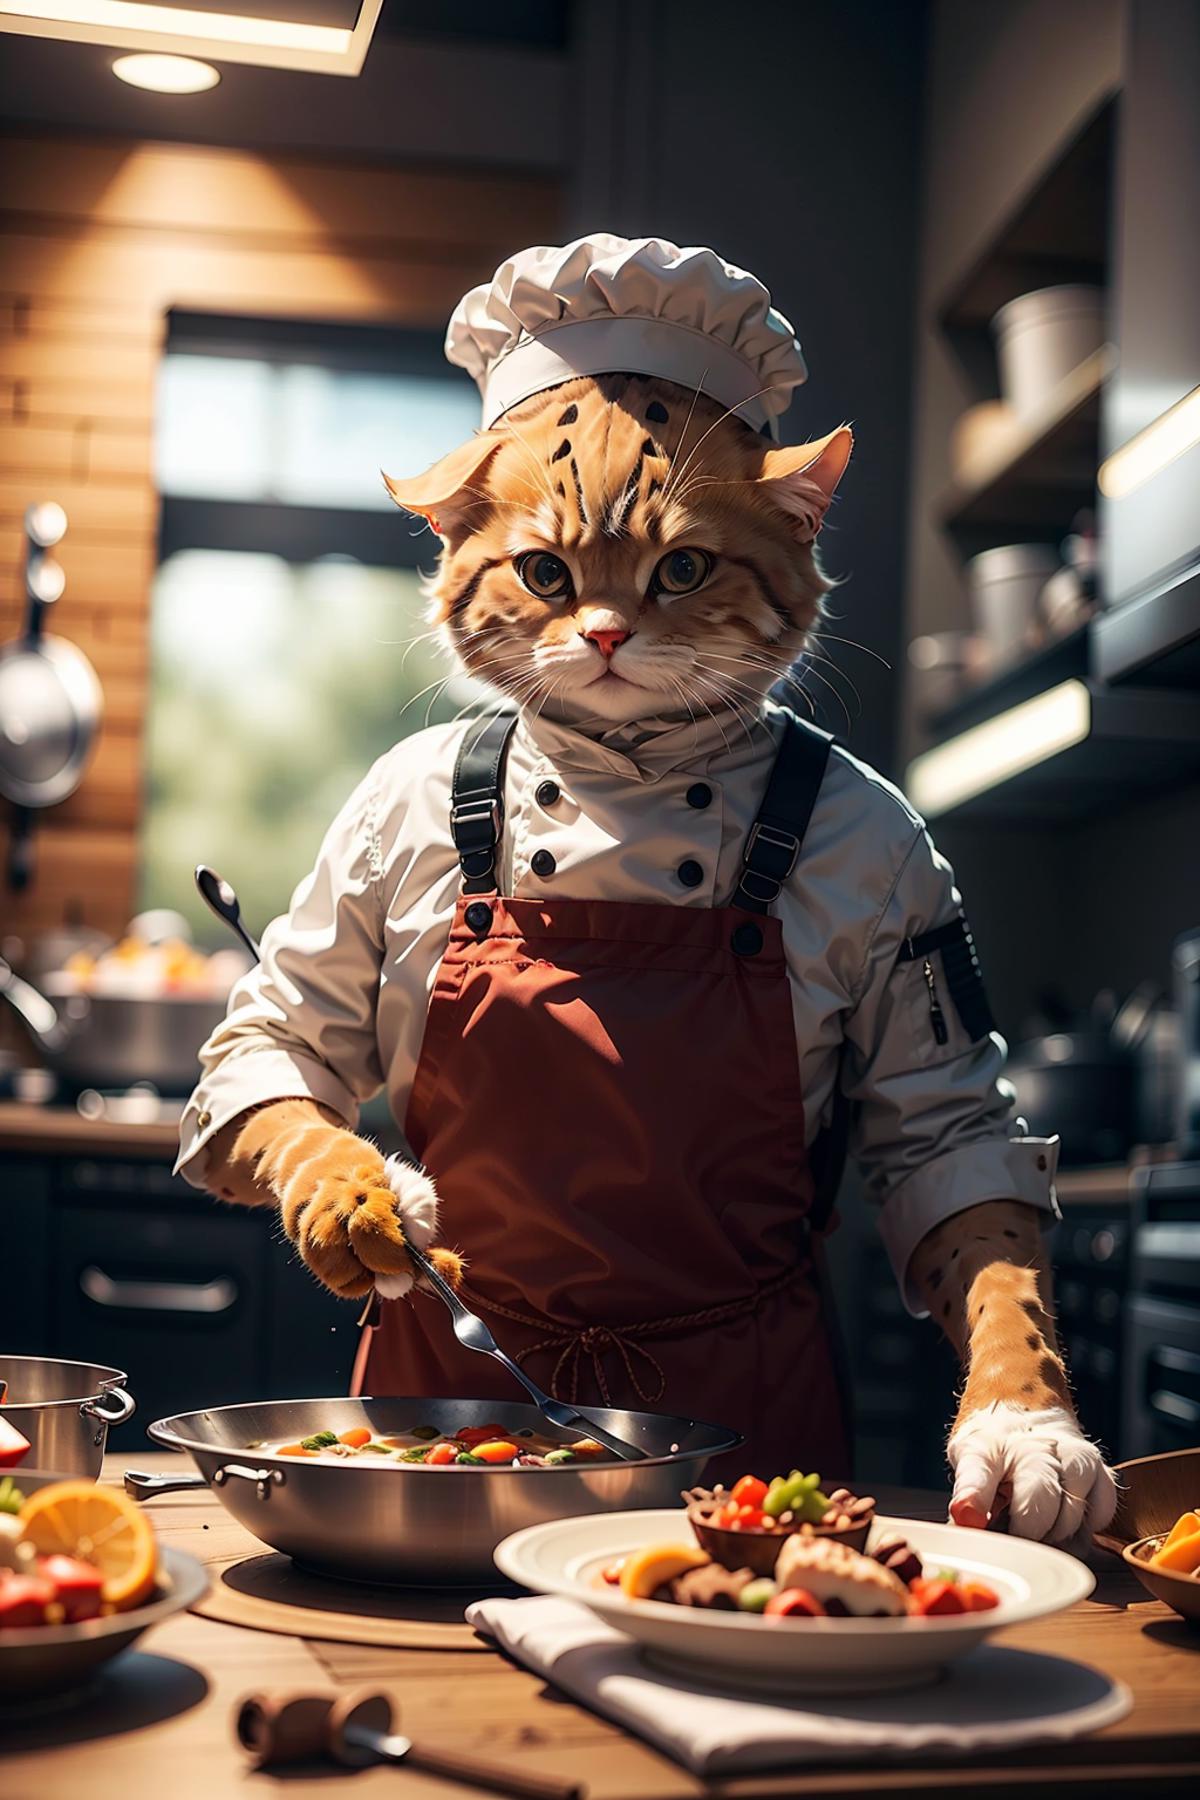 A cat dressed as a chef in an apron, cooking in a kitchen.